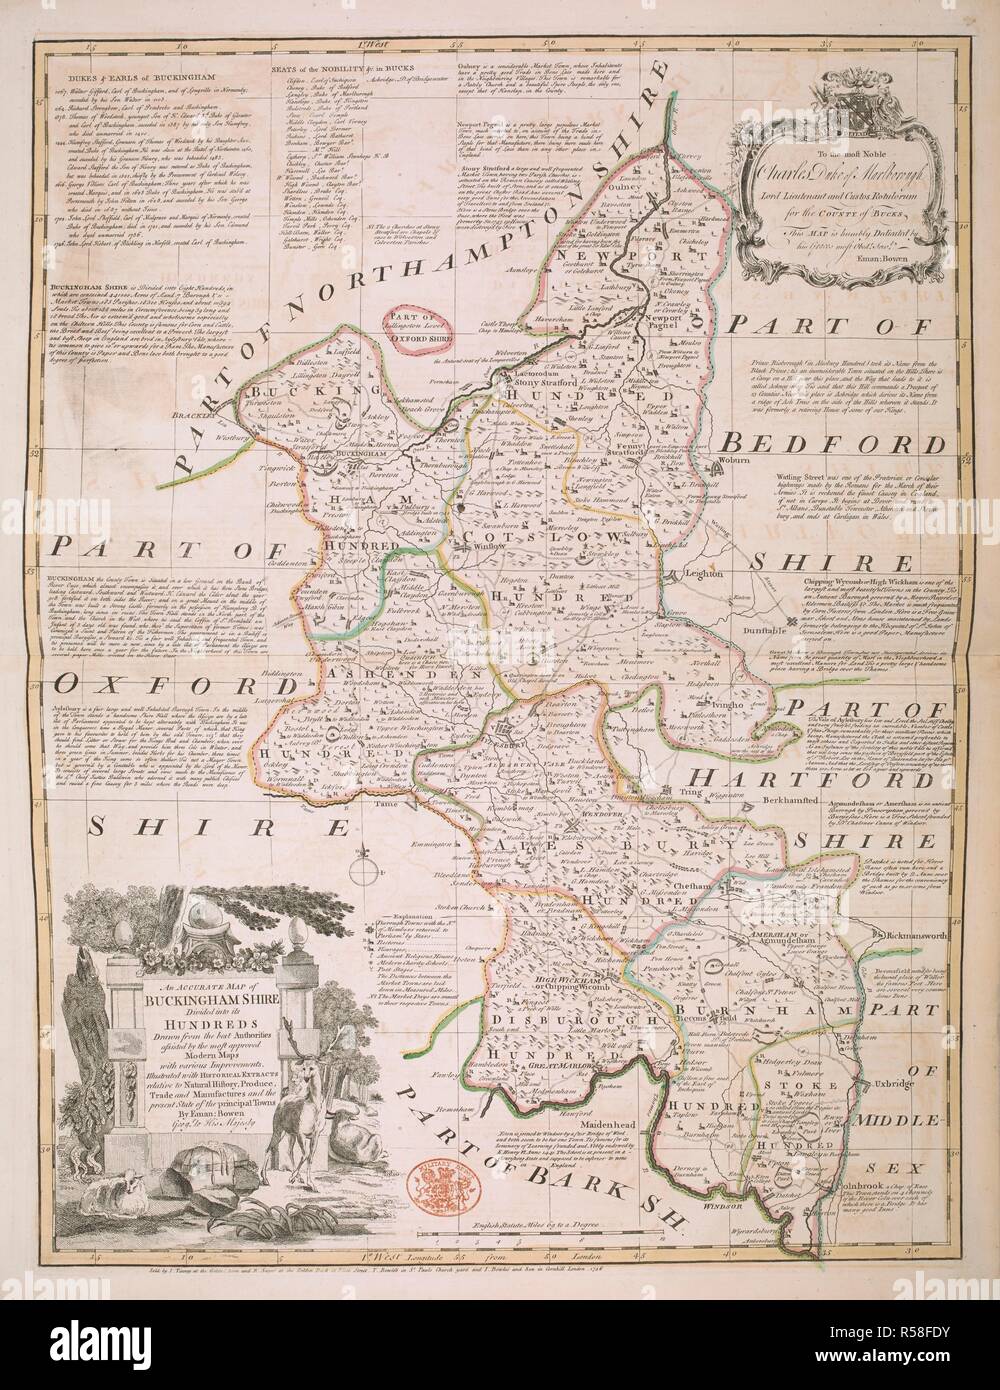 A map of Buckinghamshire. The Large English Atlas; or, a new set of maps of all the Counties in England and Wales ... By Emanuel Bowen and Thomas Kitchin. London : T. Bowles ... J. Bowles & Son ... J. Tinney ... & R. Sayer, [1760]. Source: Maps C.10.d.10, plate 6. Language: English. Stock Photo